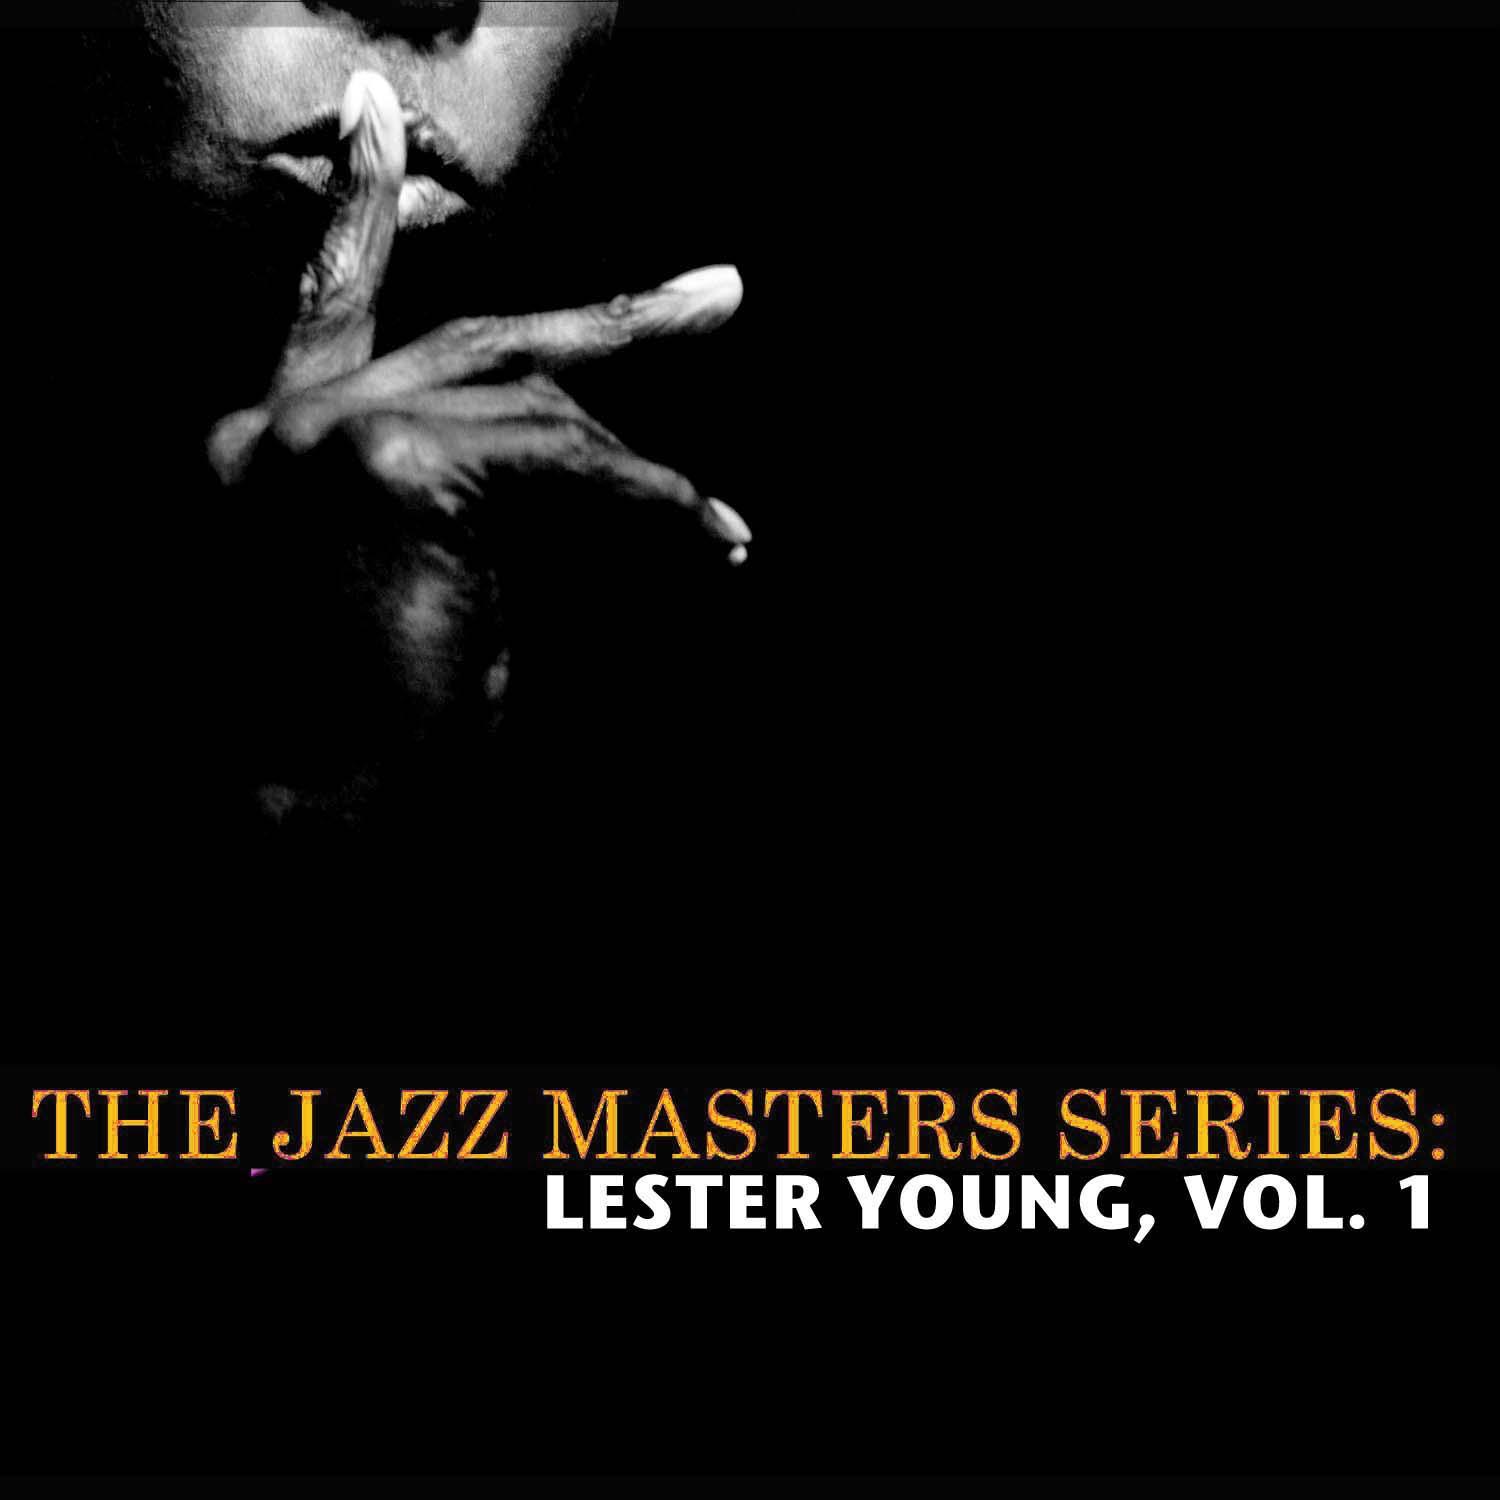 The Jazz Masters Series: Lester Young, Vol. 1